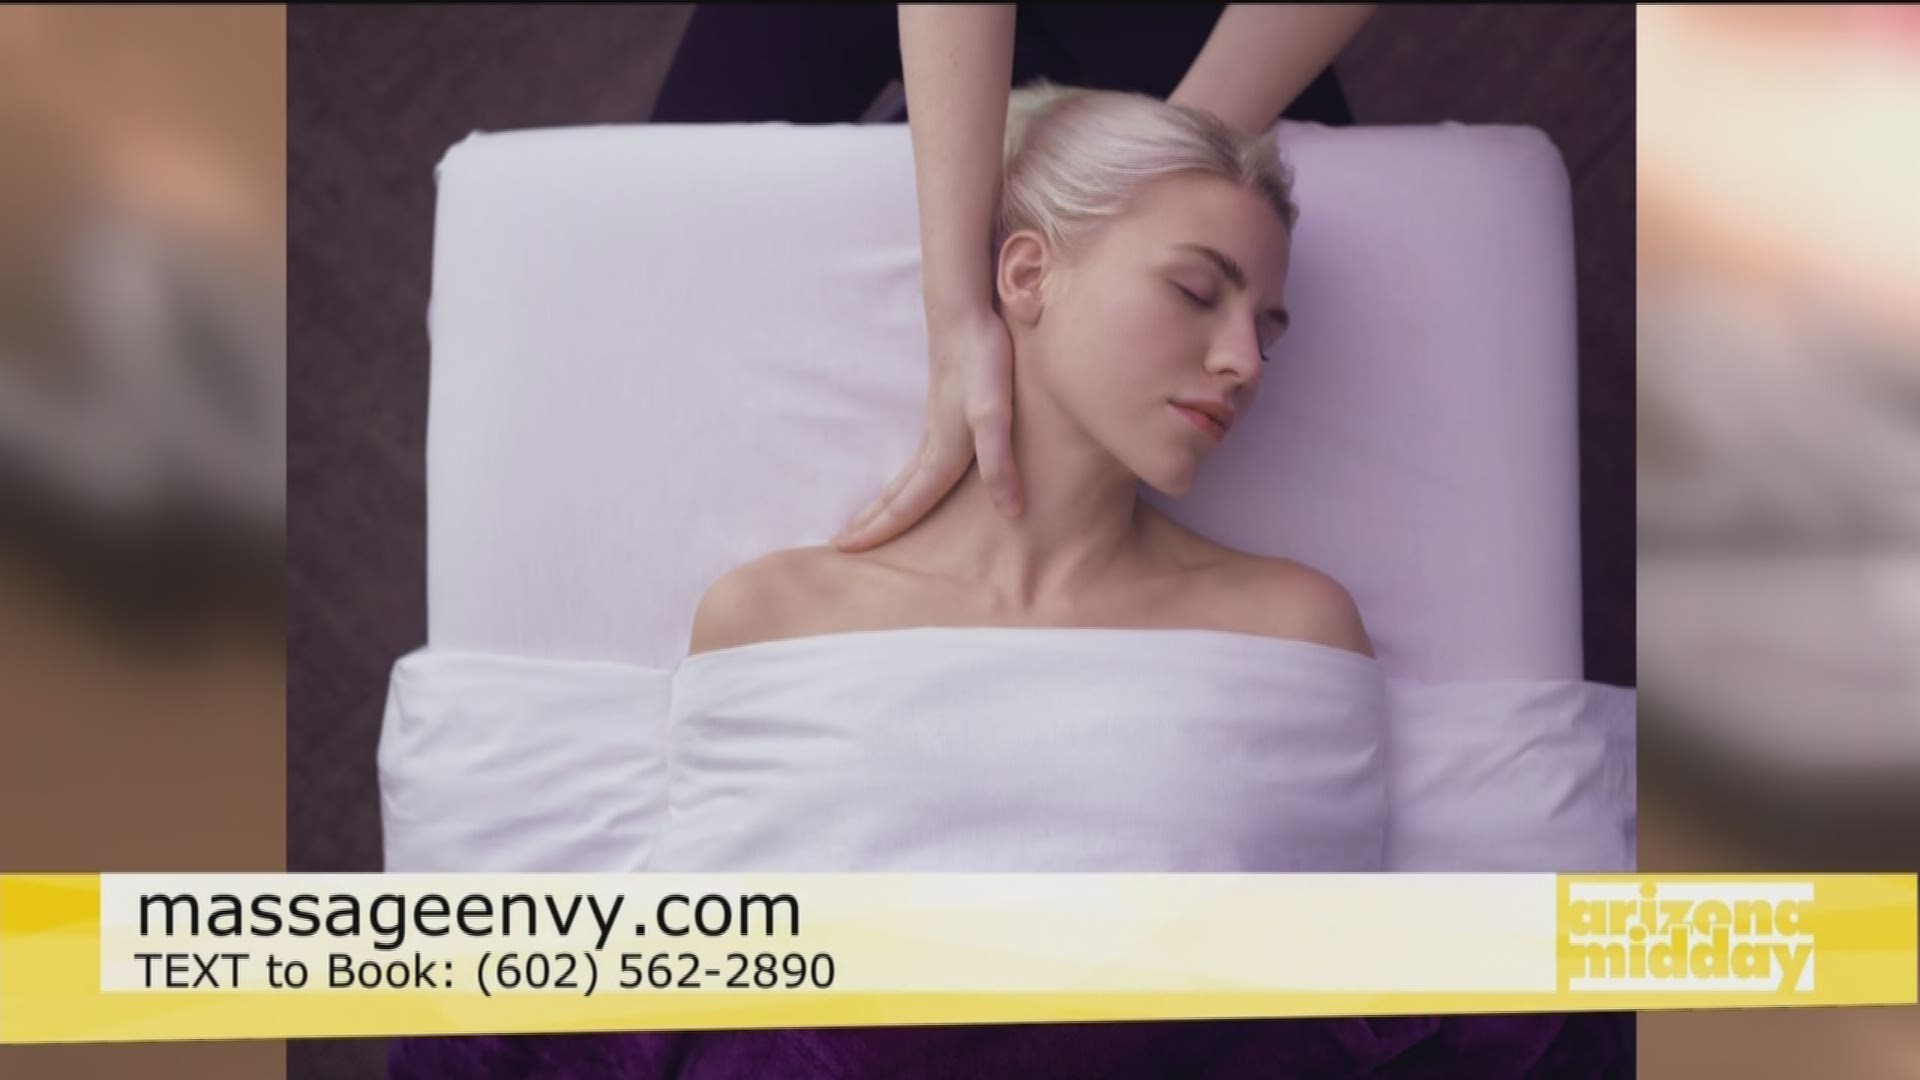 Erica Berl with Massage Envy fills us in on everything from massages to skincare offered at Massage Envy and how you can get a special deal